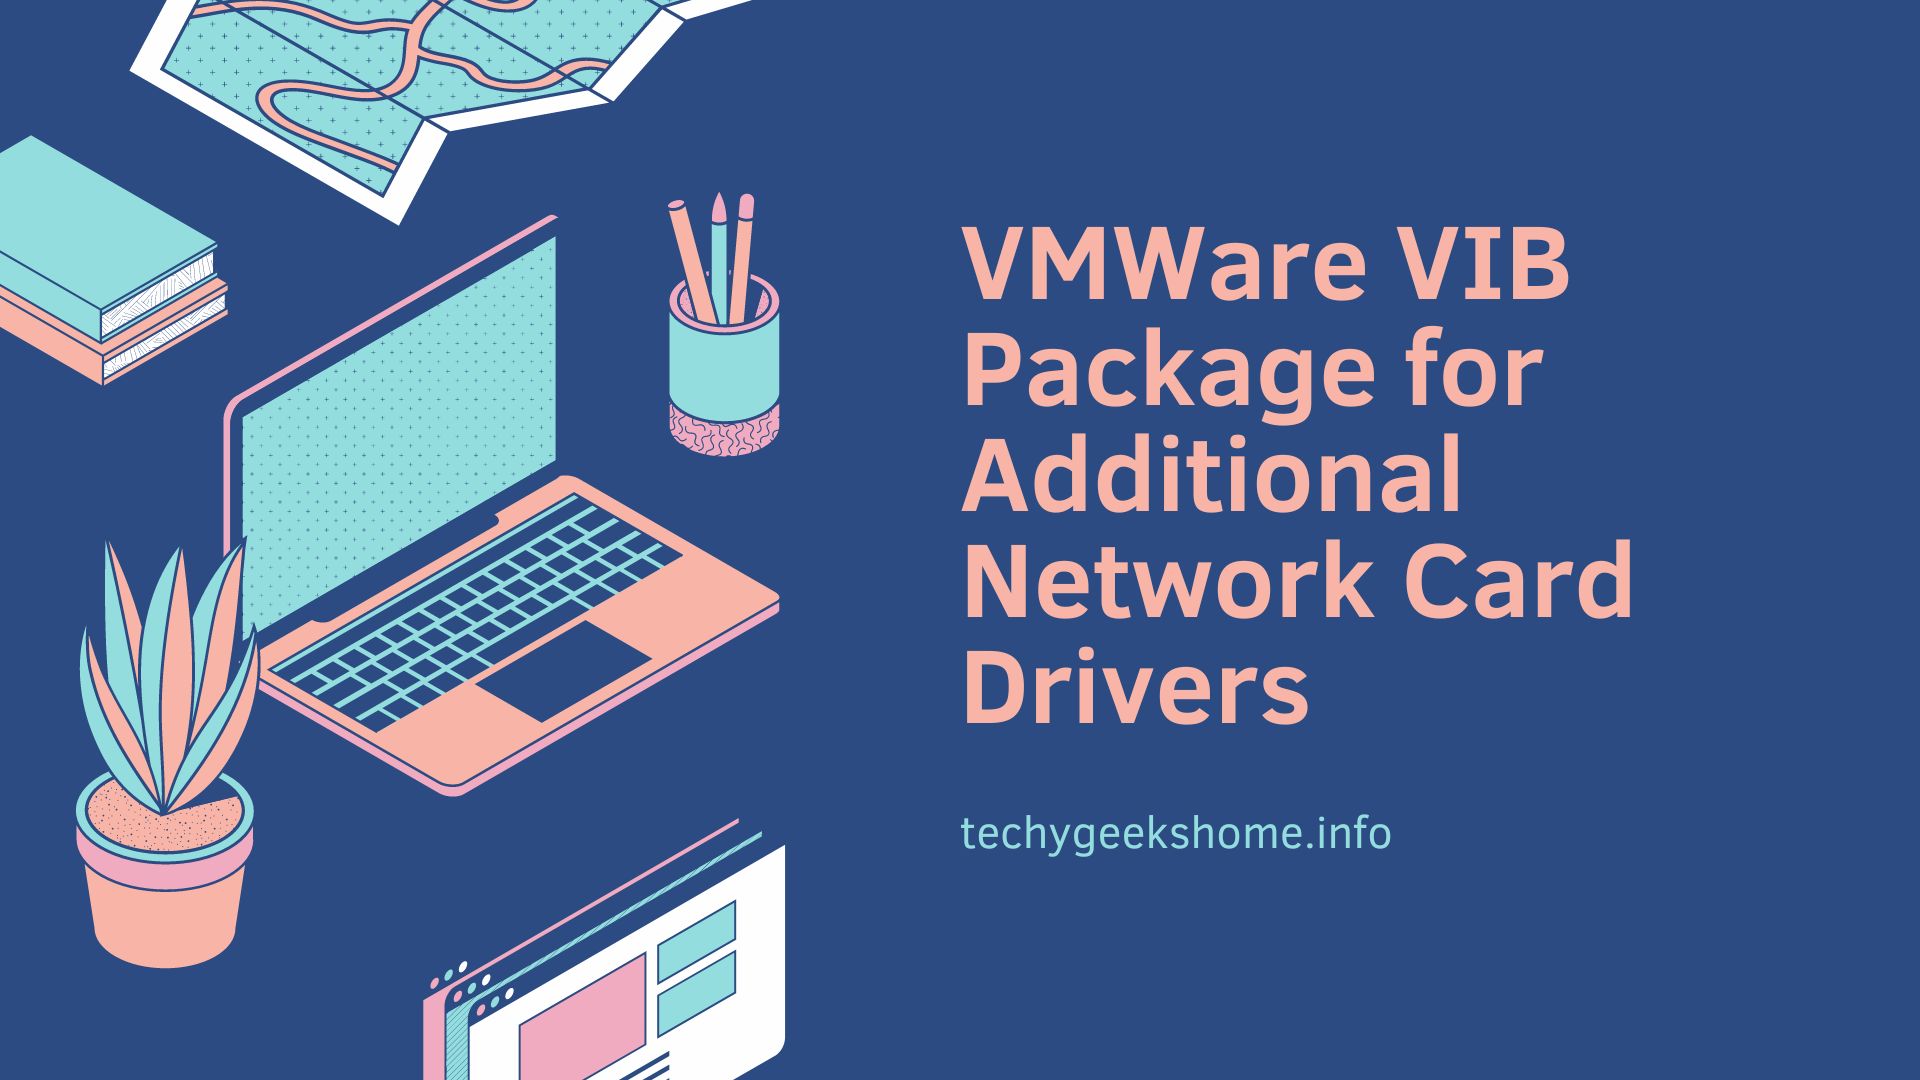 VMWare VIB Package for Additional Network Card Drivers